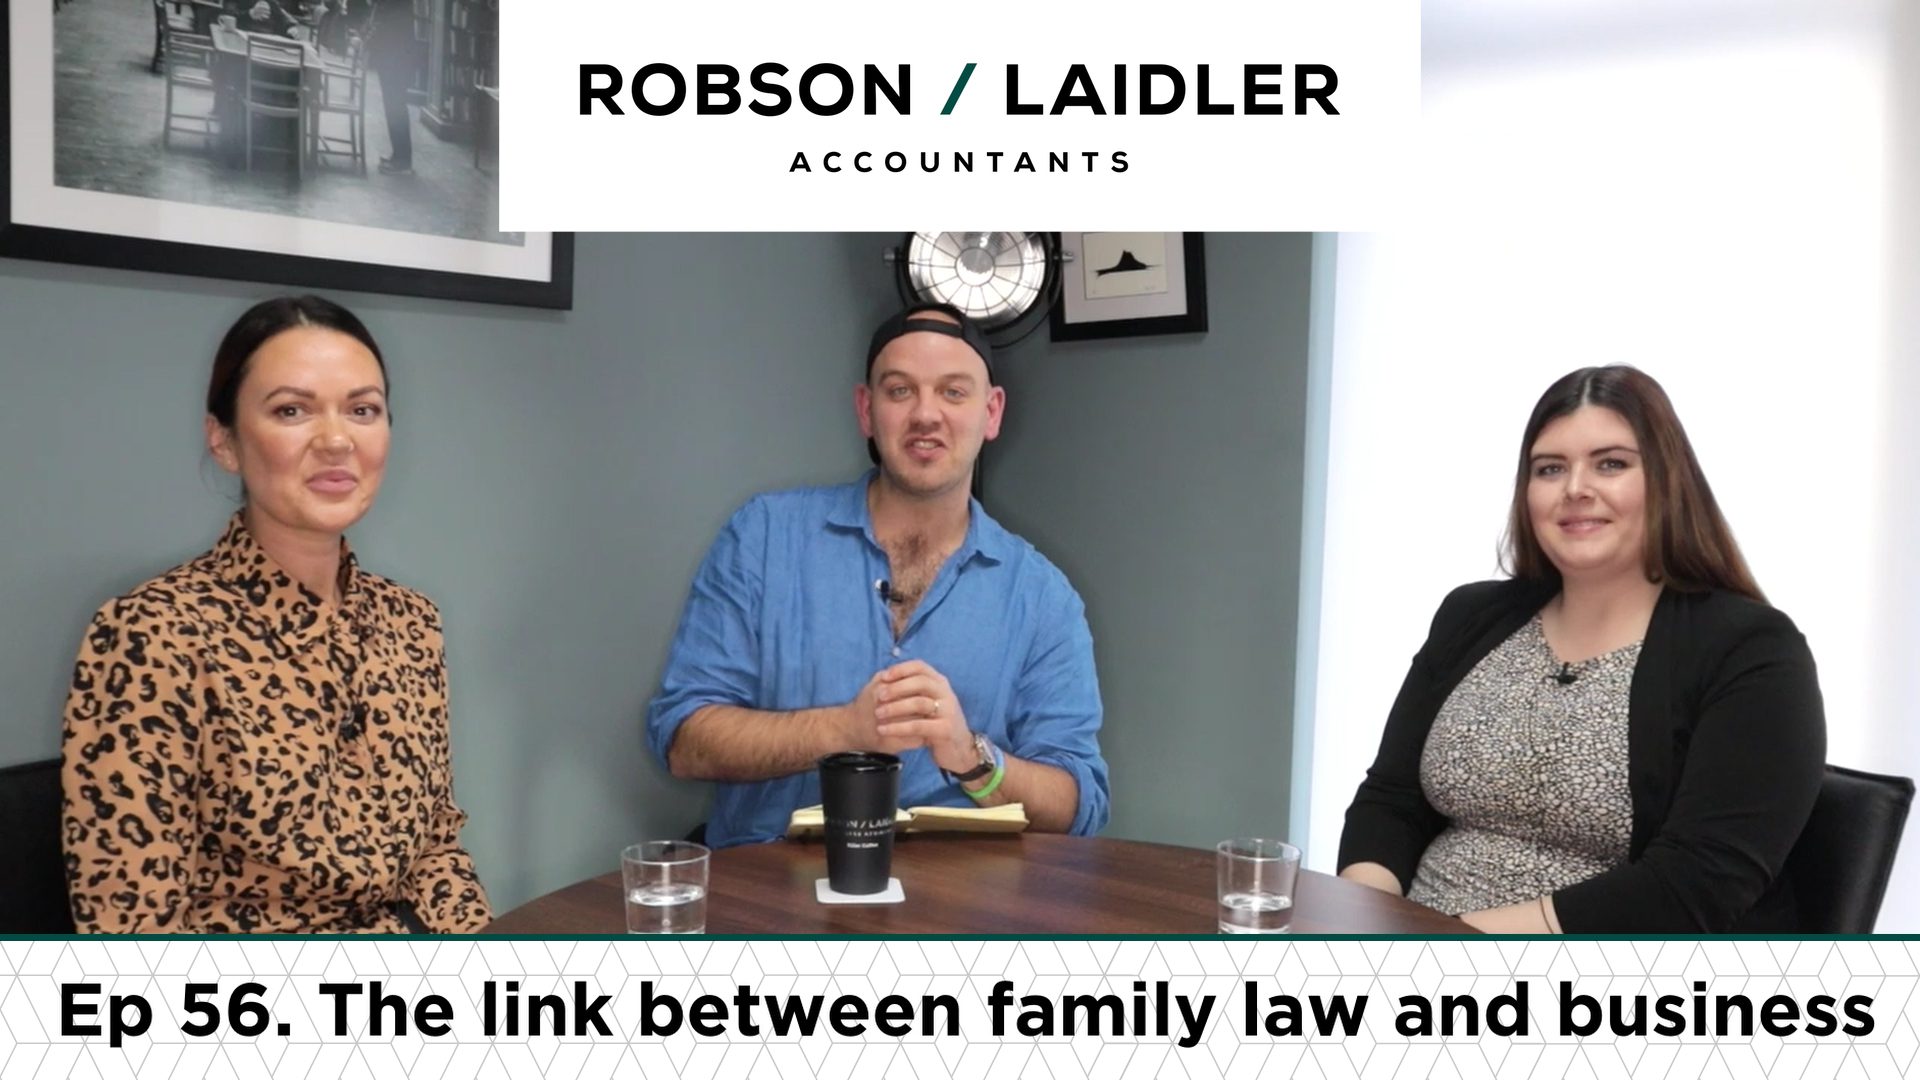 Link between family, law and business podcast